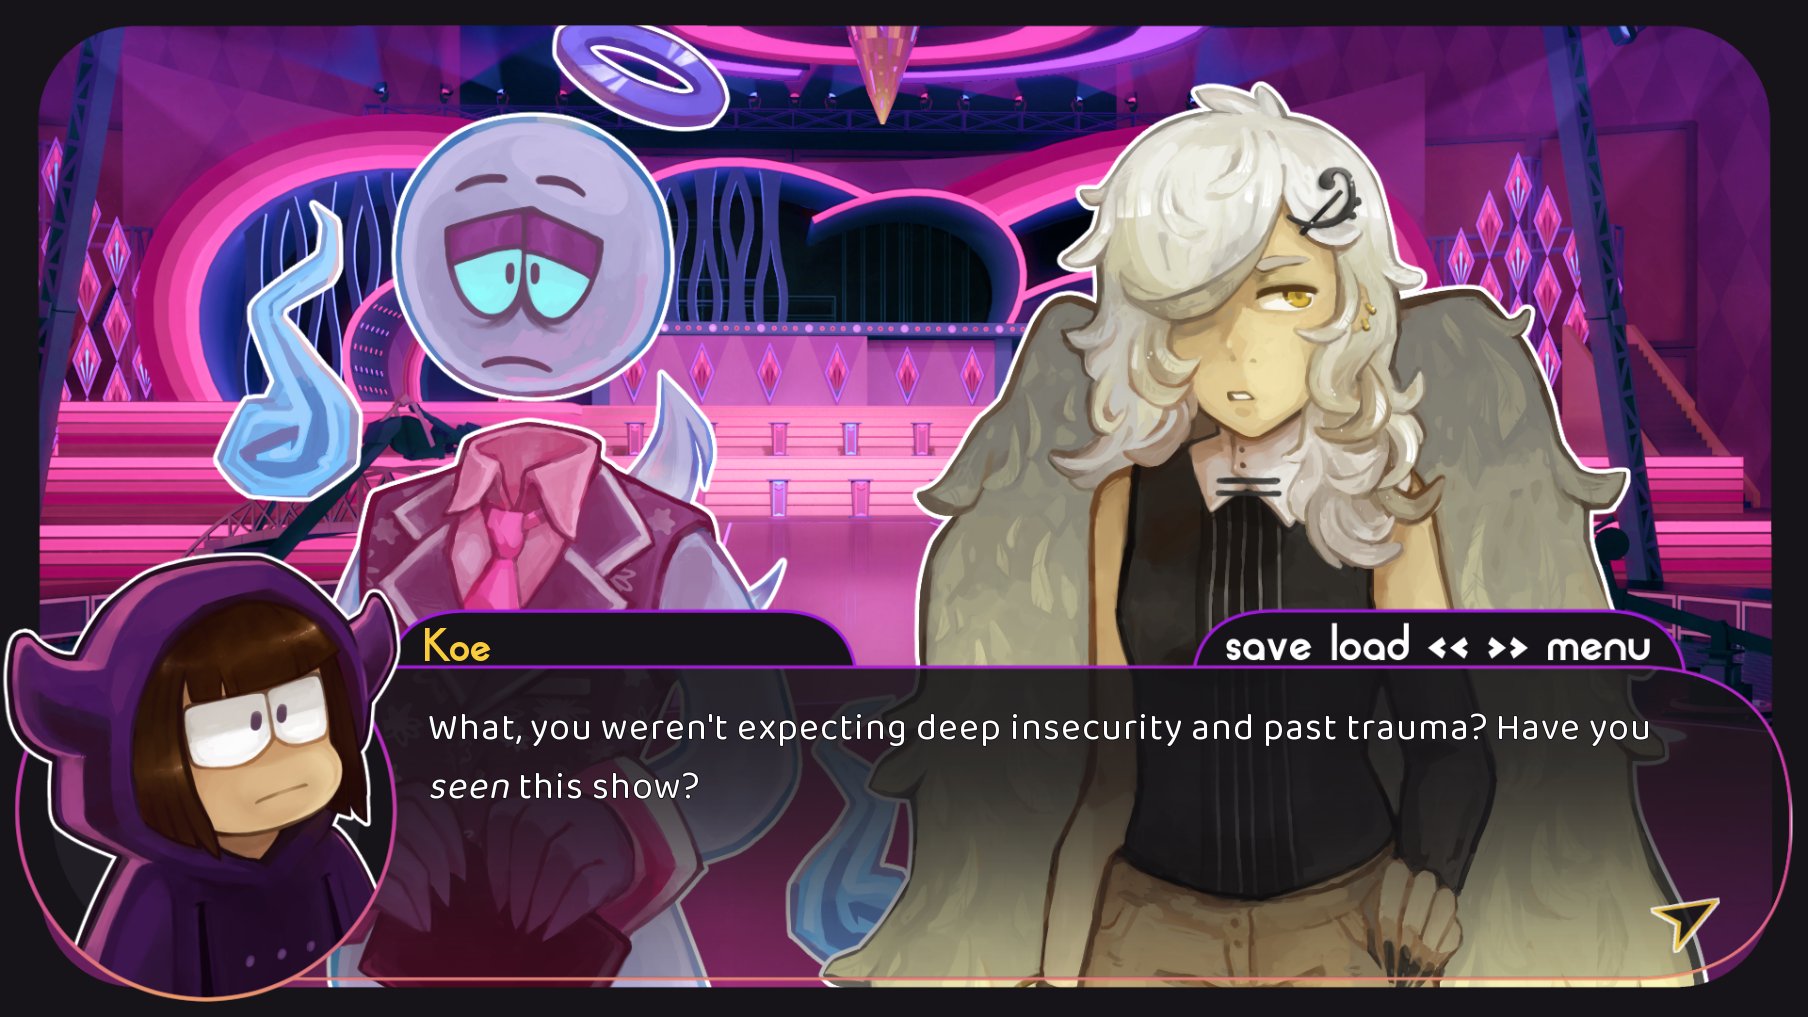 a screenshot from a visual novel game, with a background of a purple and pink stage set; the main character is talking to the host as well as a siren with large yellow wings. The siren, Koe, is rolling her eyes and saying "What, you weren't expecting deep insecurity and past trauma? Have you seen this show?"